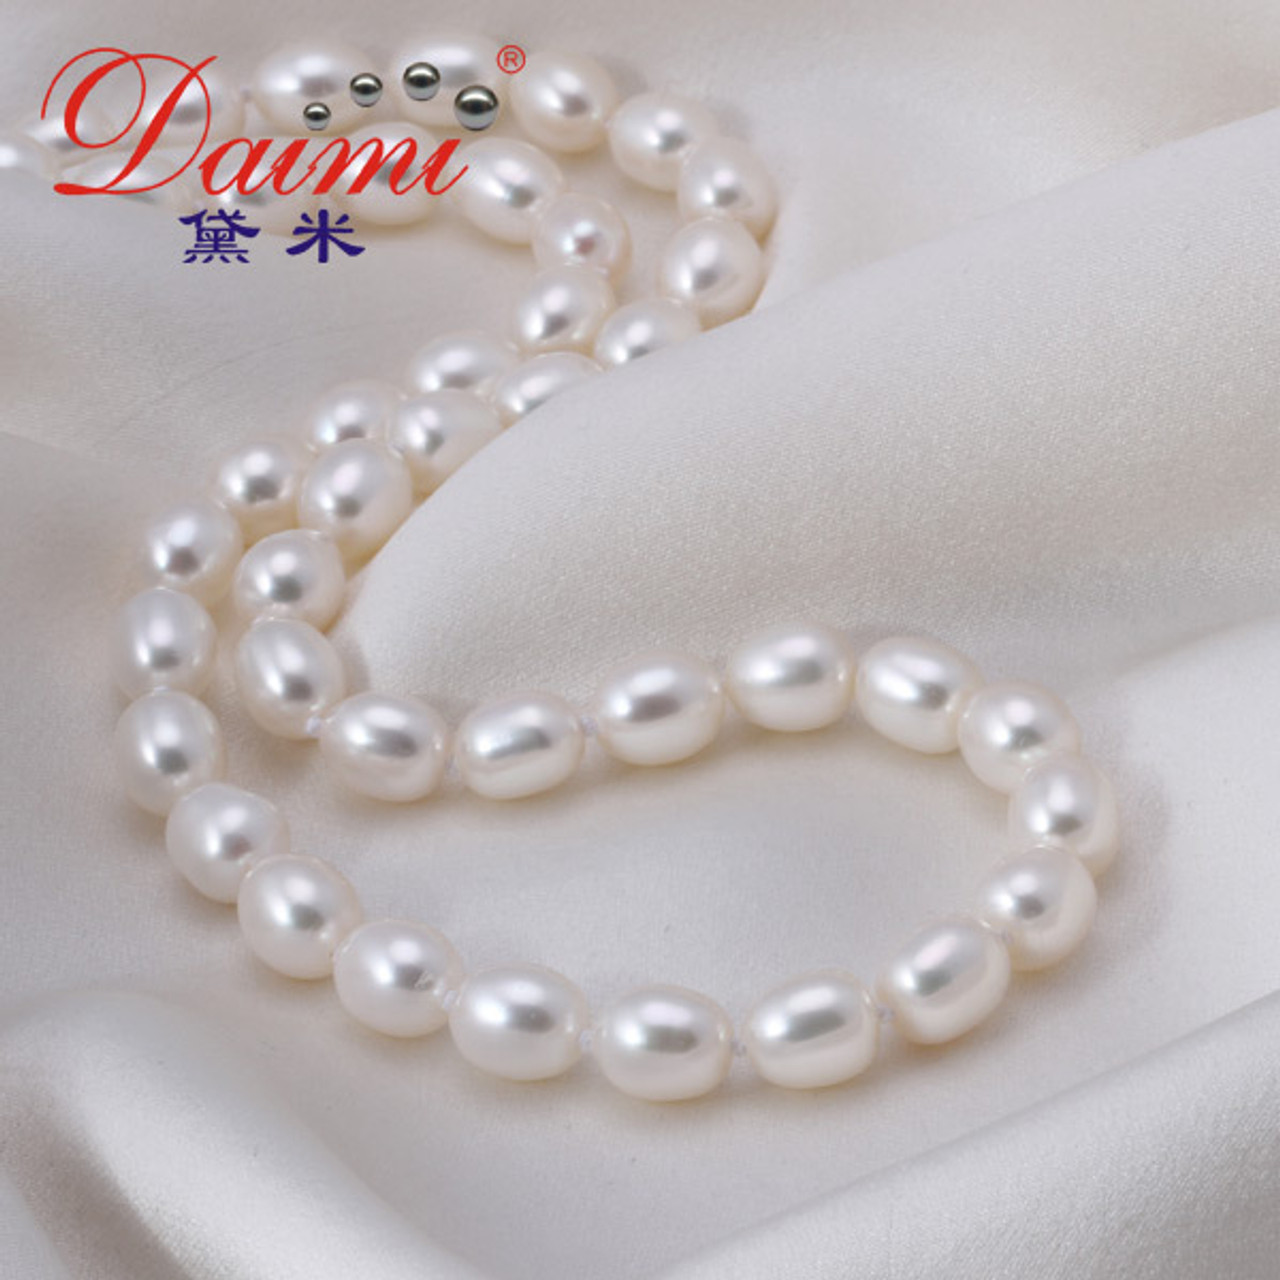 Double strand cultured freshwater pearl necklace – Barb McSweeney Jewelry